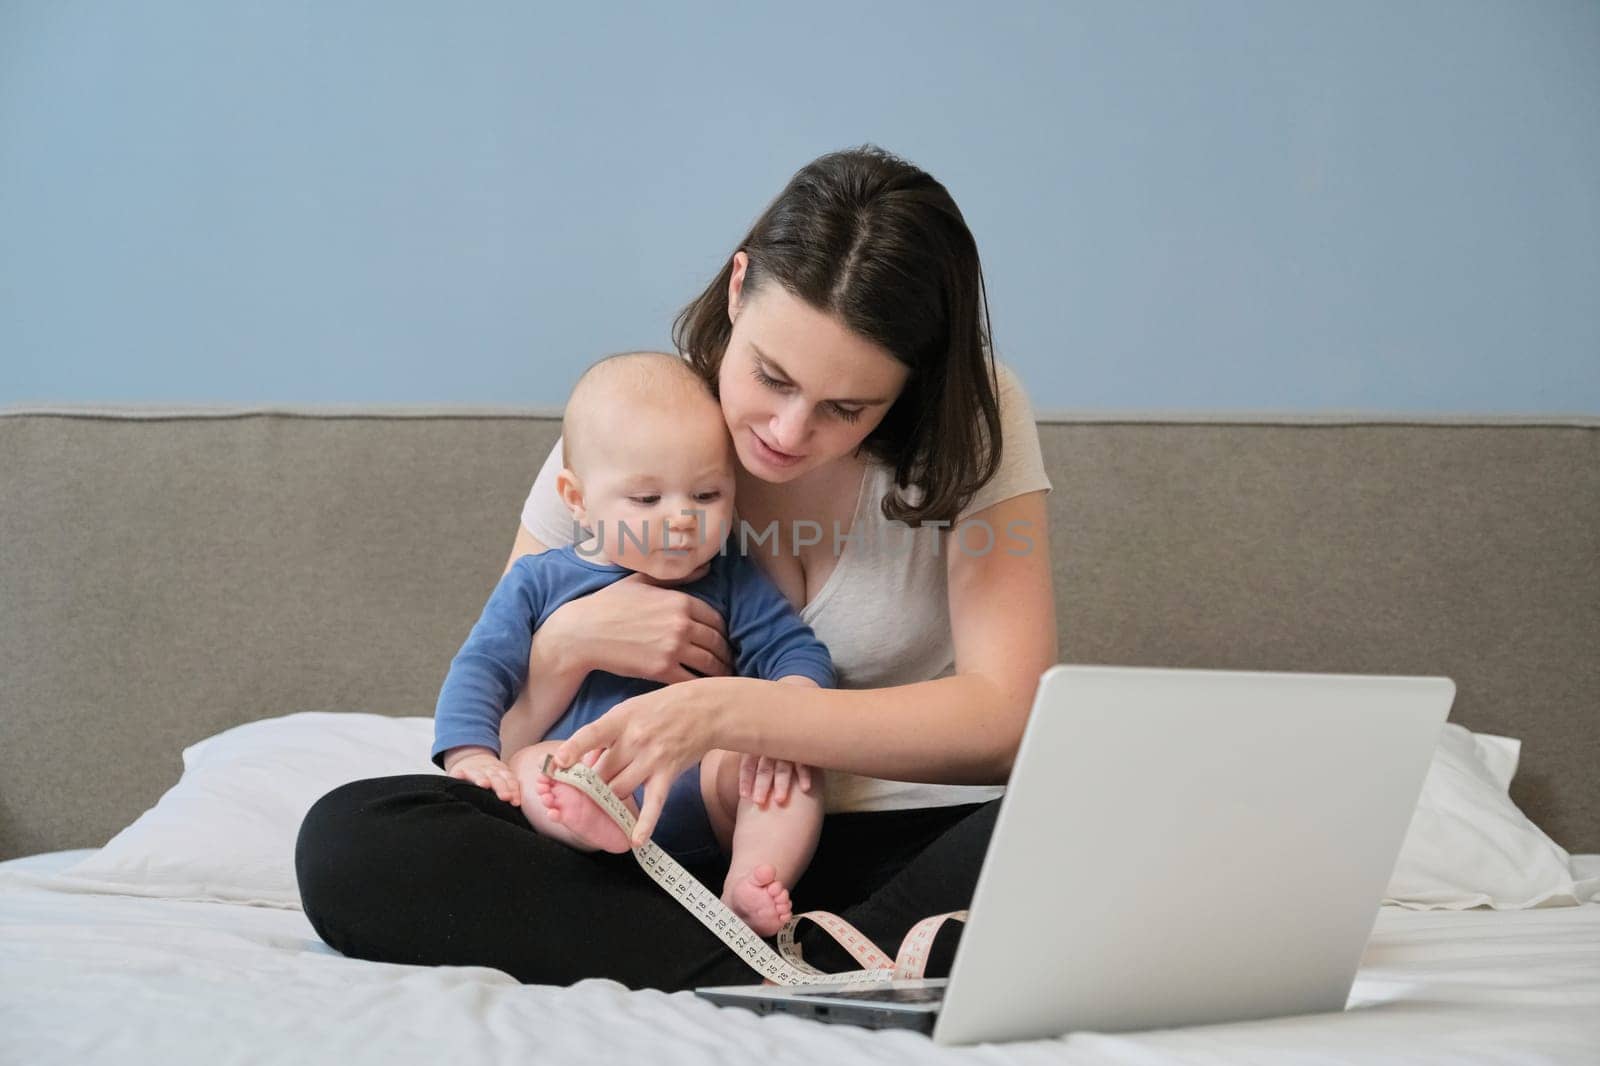 Mother with centimeter tape measuring her baby sitting at home on bed with laptop computer